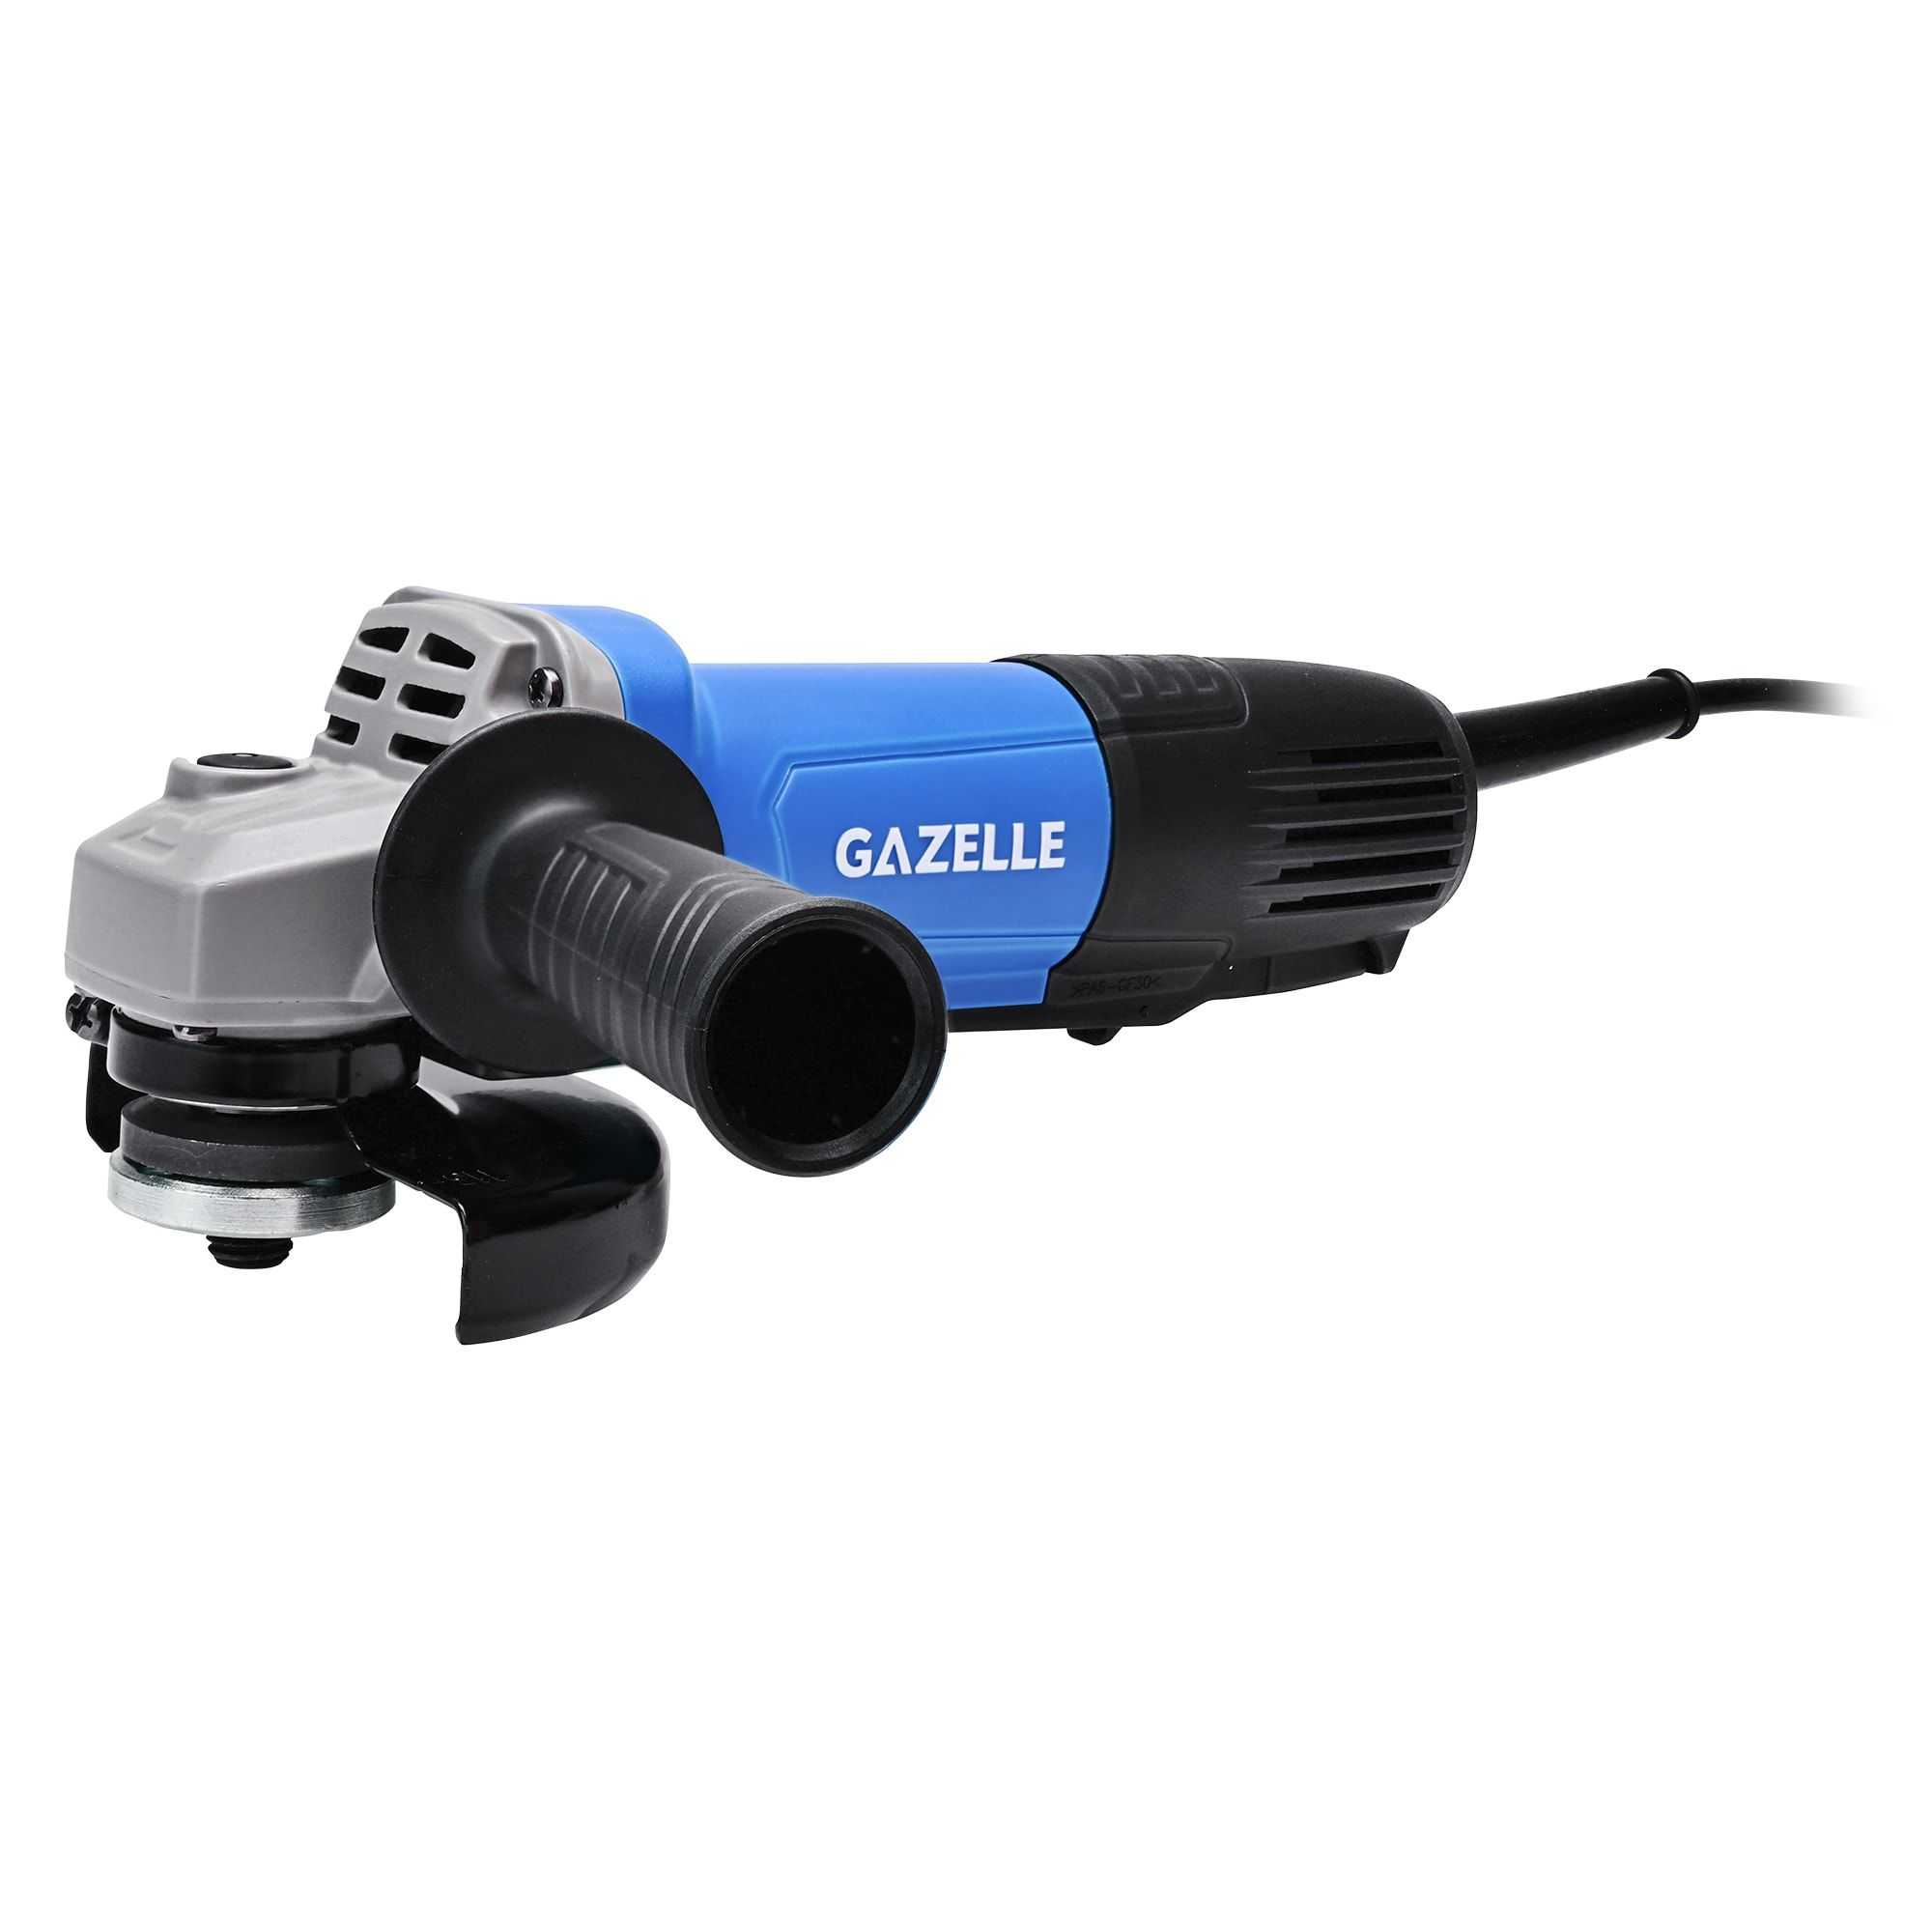 4 1/2" Angle Grinder 800W Paddle Switch